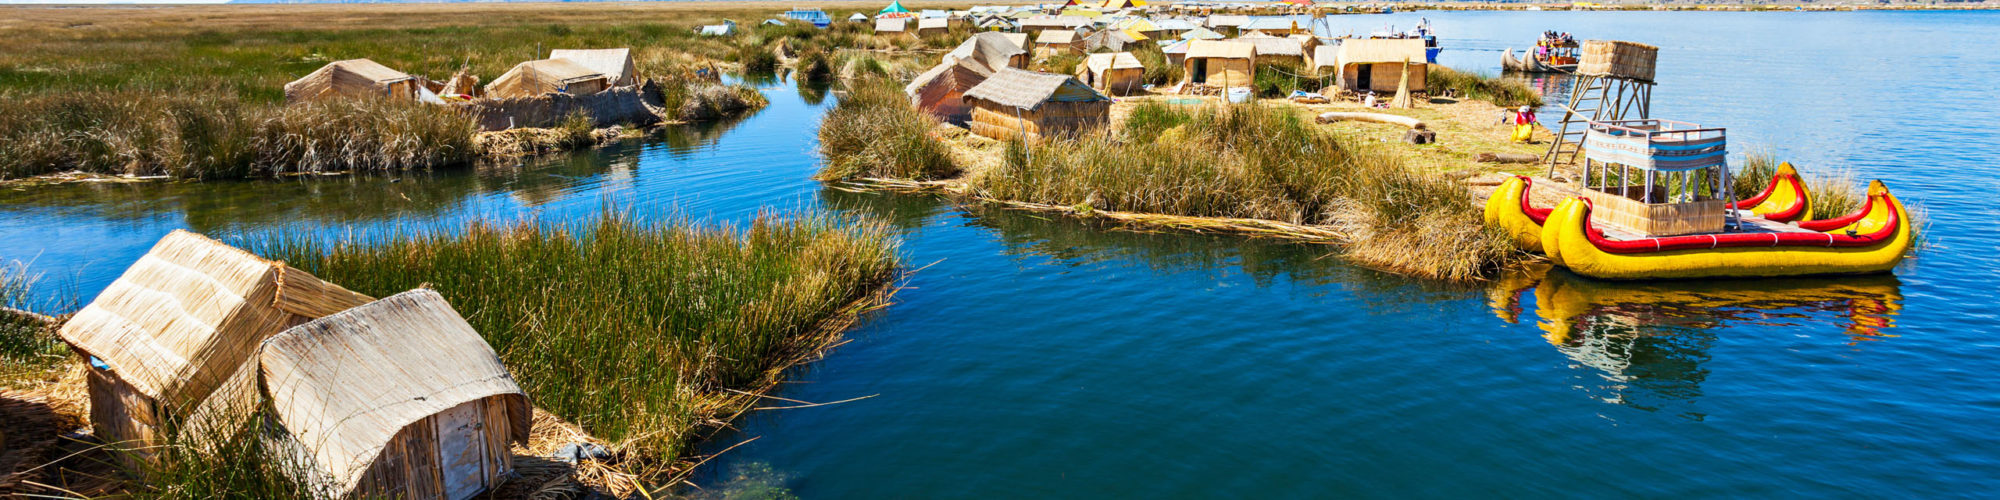 Lake Titicaca travel agents packages deals